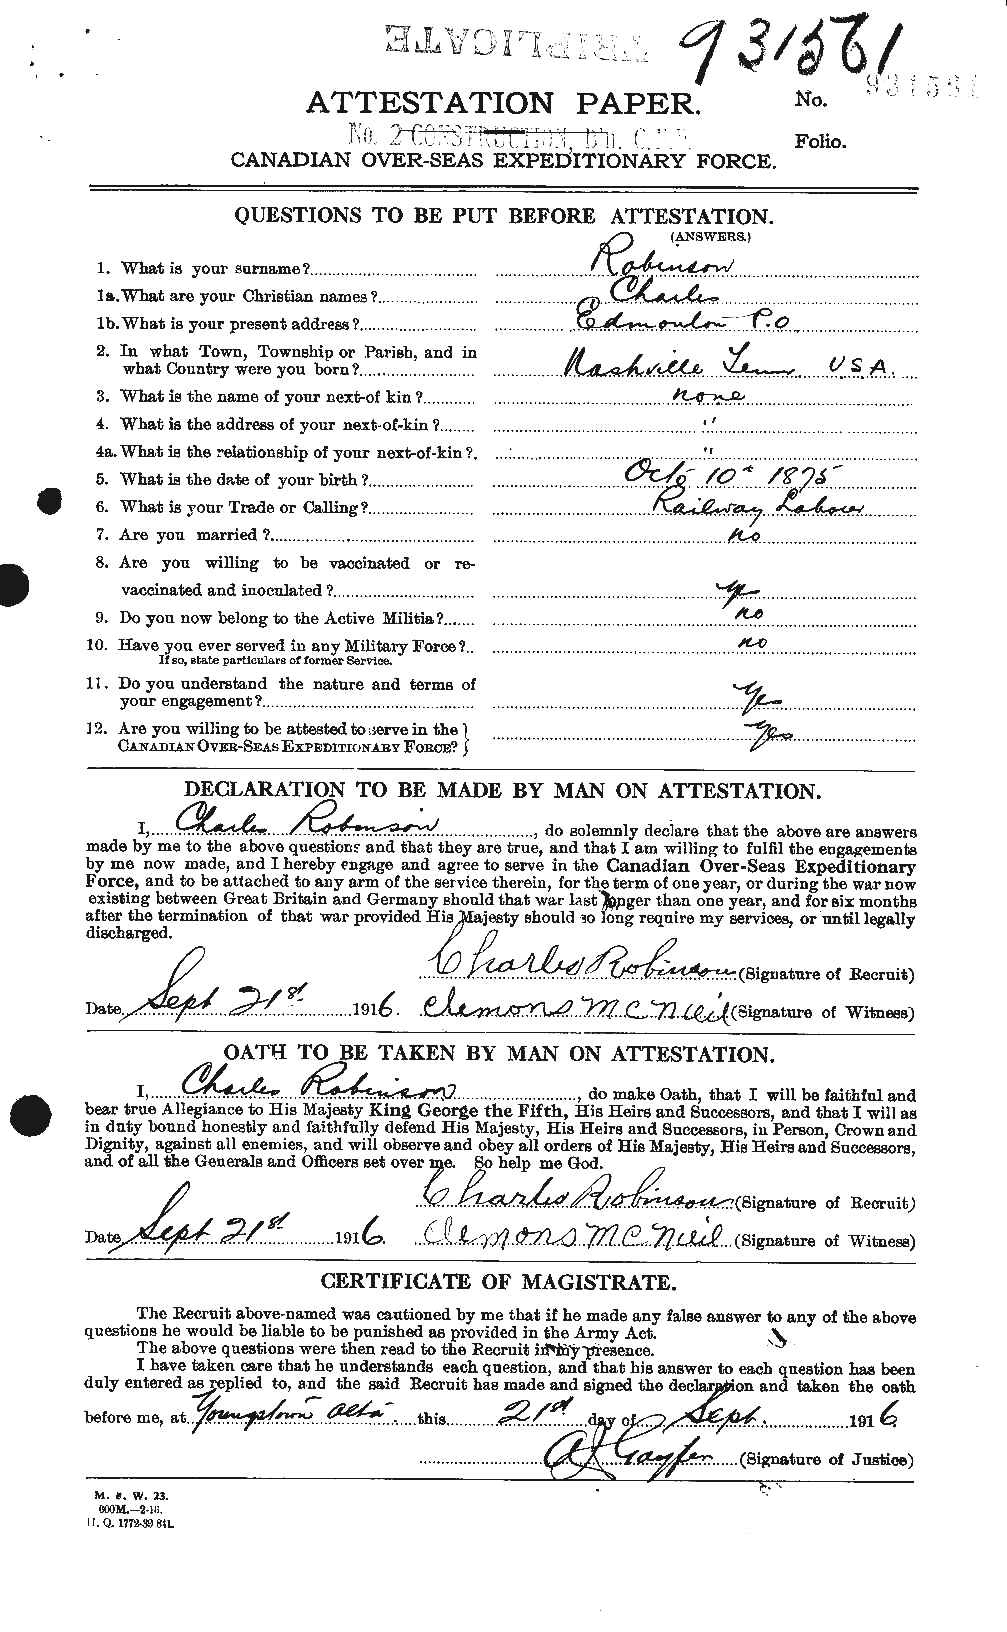 Personnel Records of the First World War - CEF 607050a